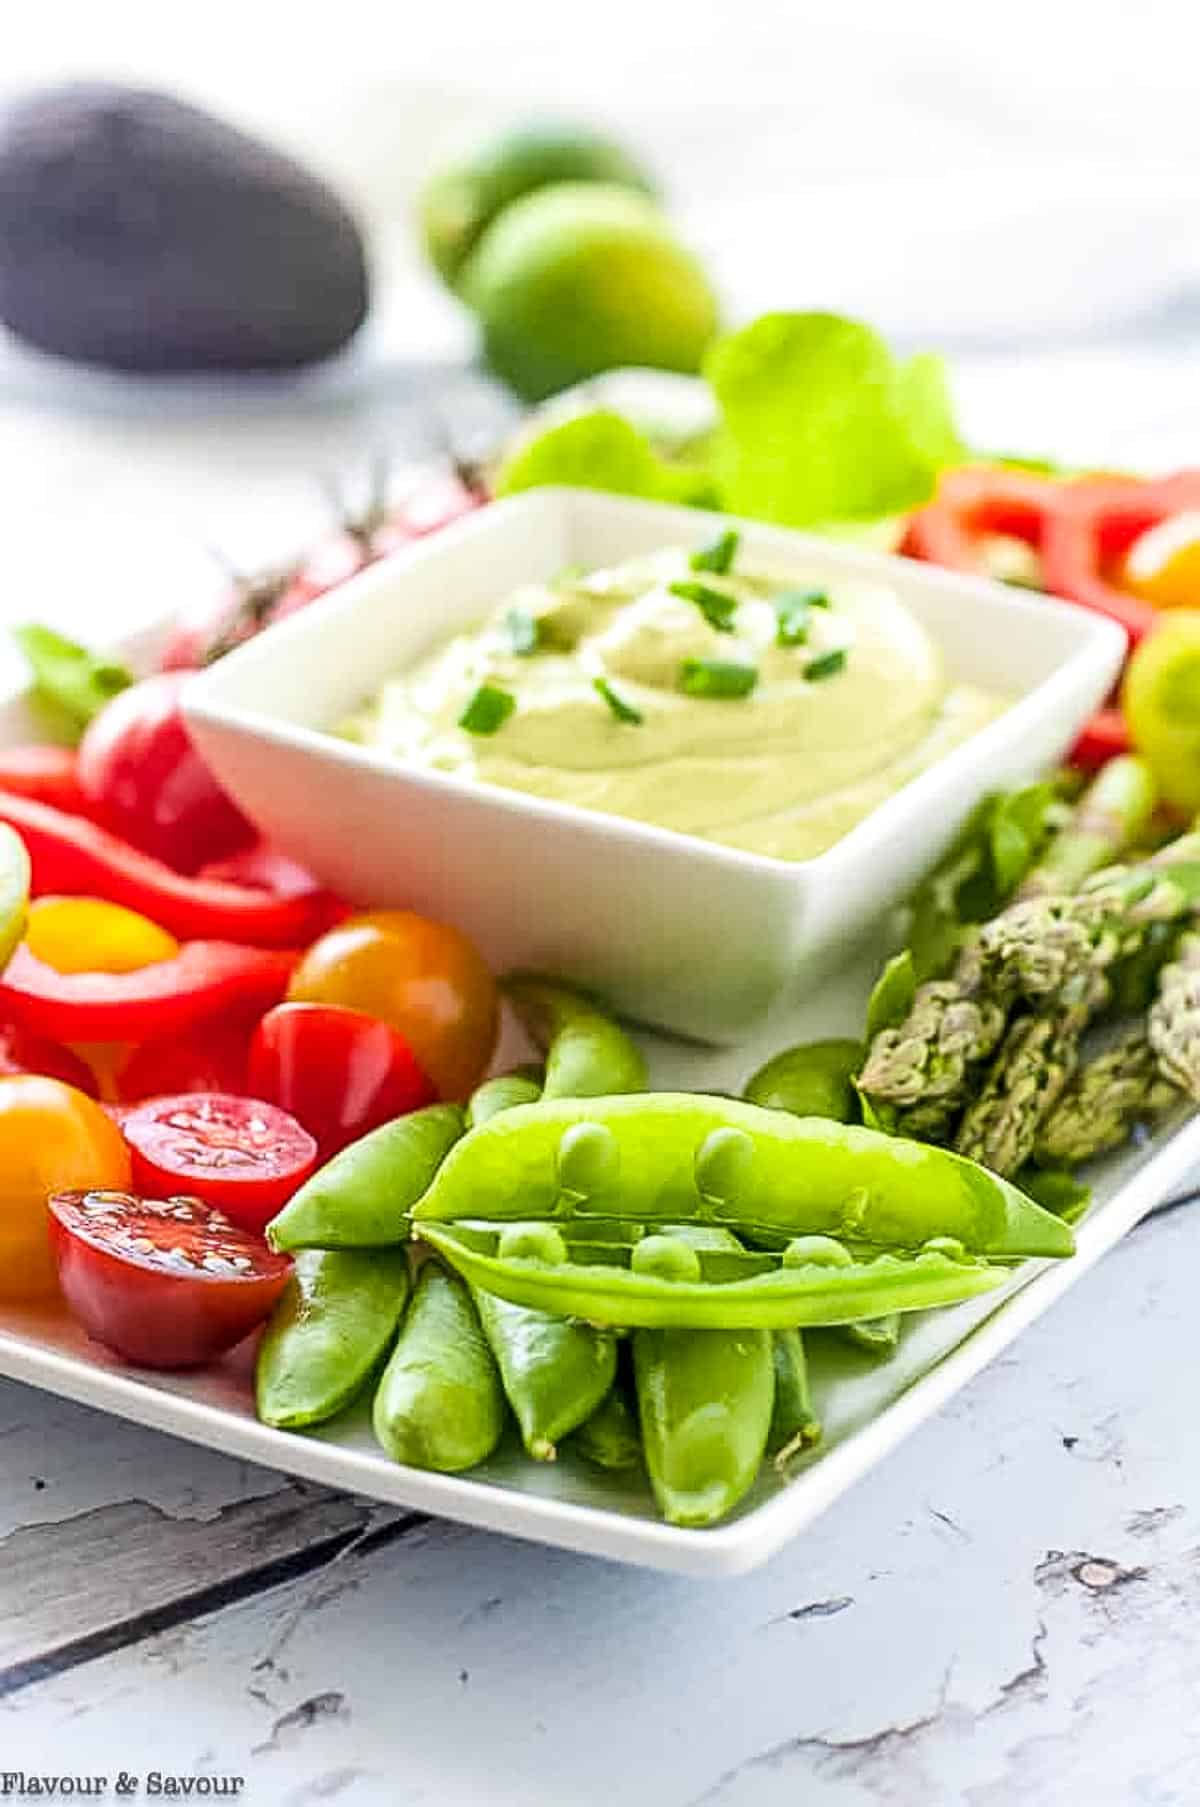 Fresh pea pods, tomatoes, asparagus and other vegetables around a dish of green goddess dip.